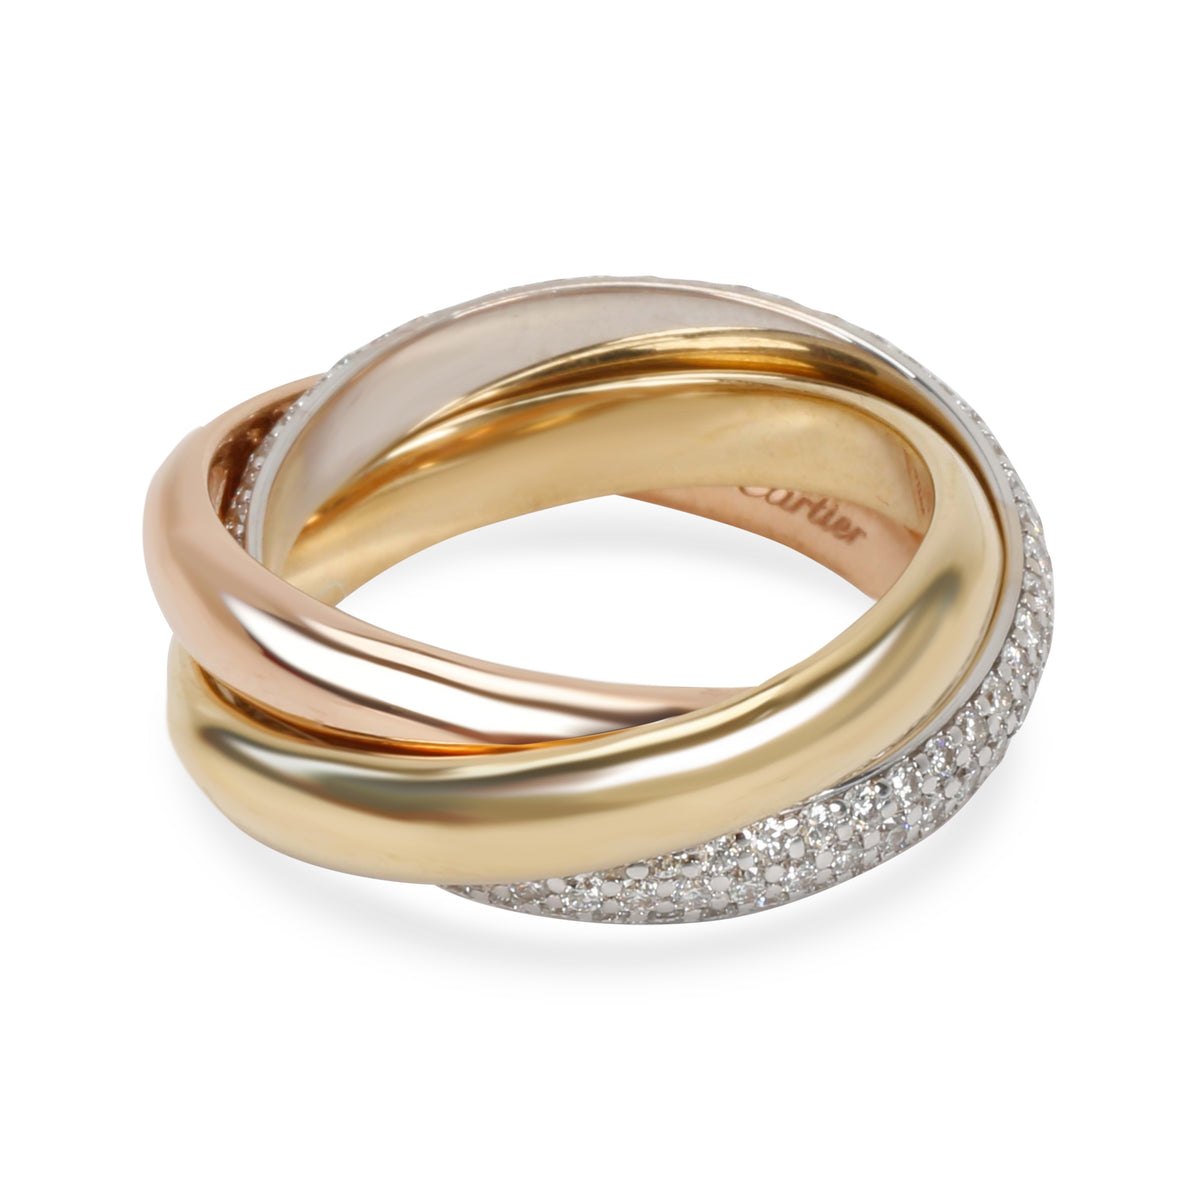 Cartier Trinity One Diamond Ring in 18K Rose, White & Yellow Gold 0.99 CTW